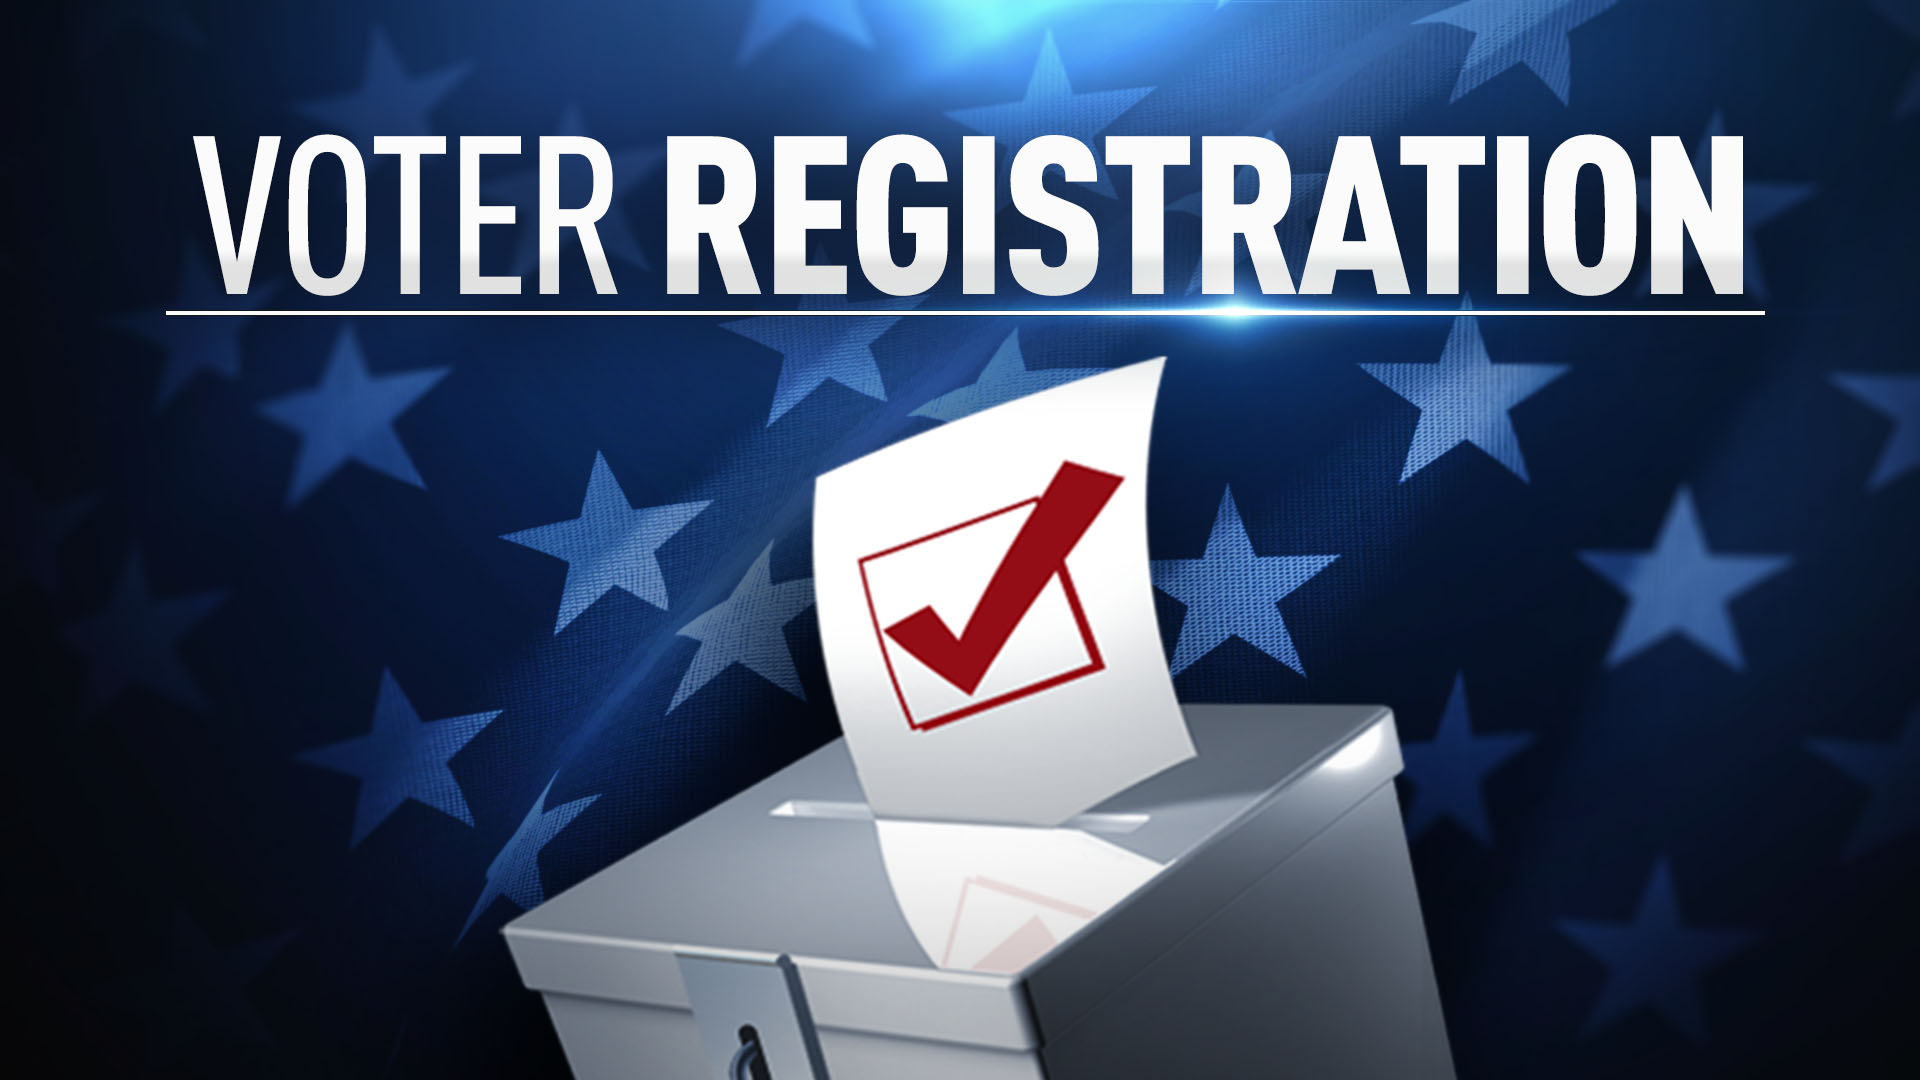 how to register to vote